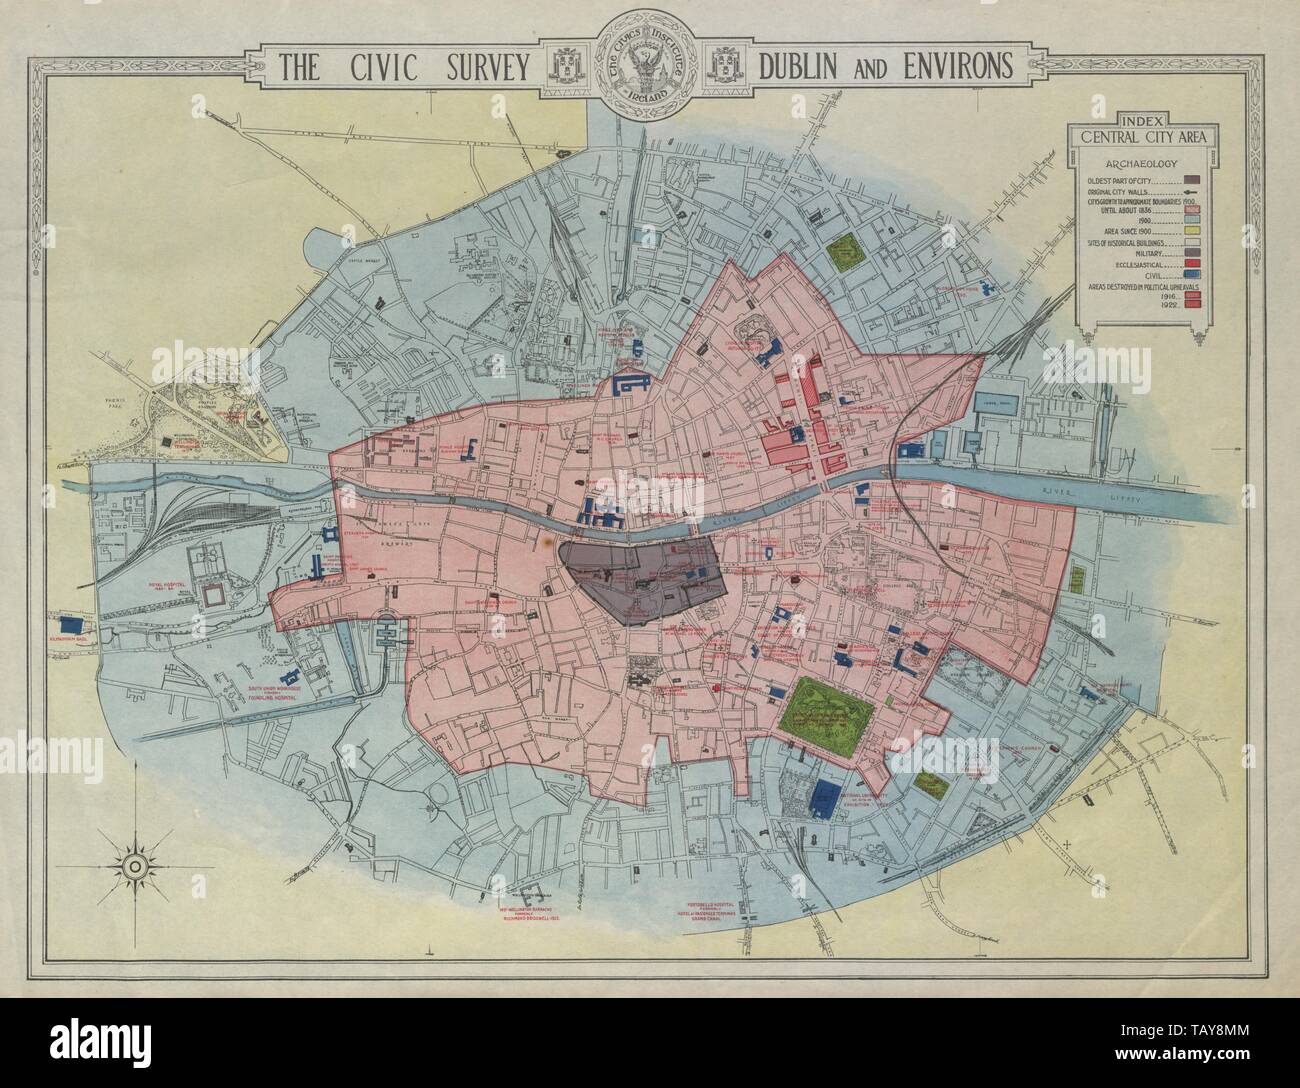 DUBLIN CIVIC SURVEY Archaeology. Growth from 1900. Historic buildings 1925 map Stock Photo